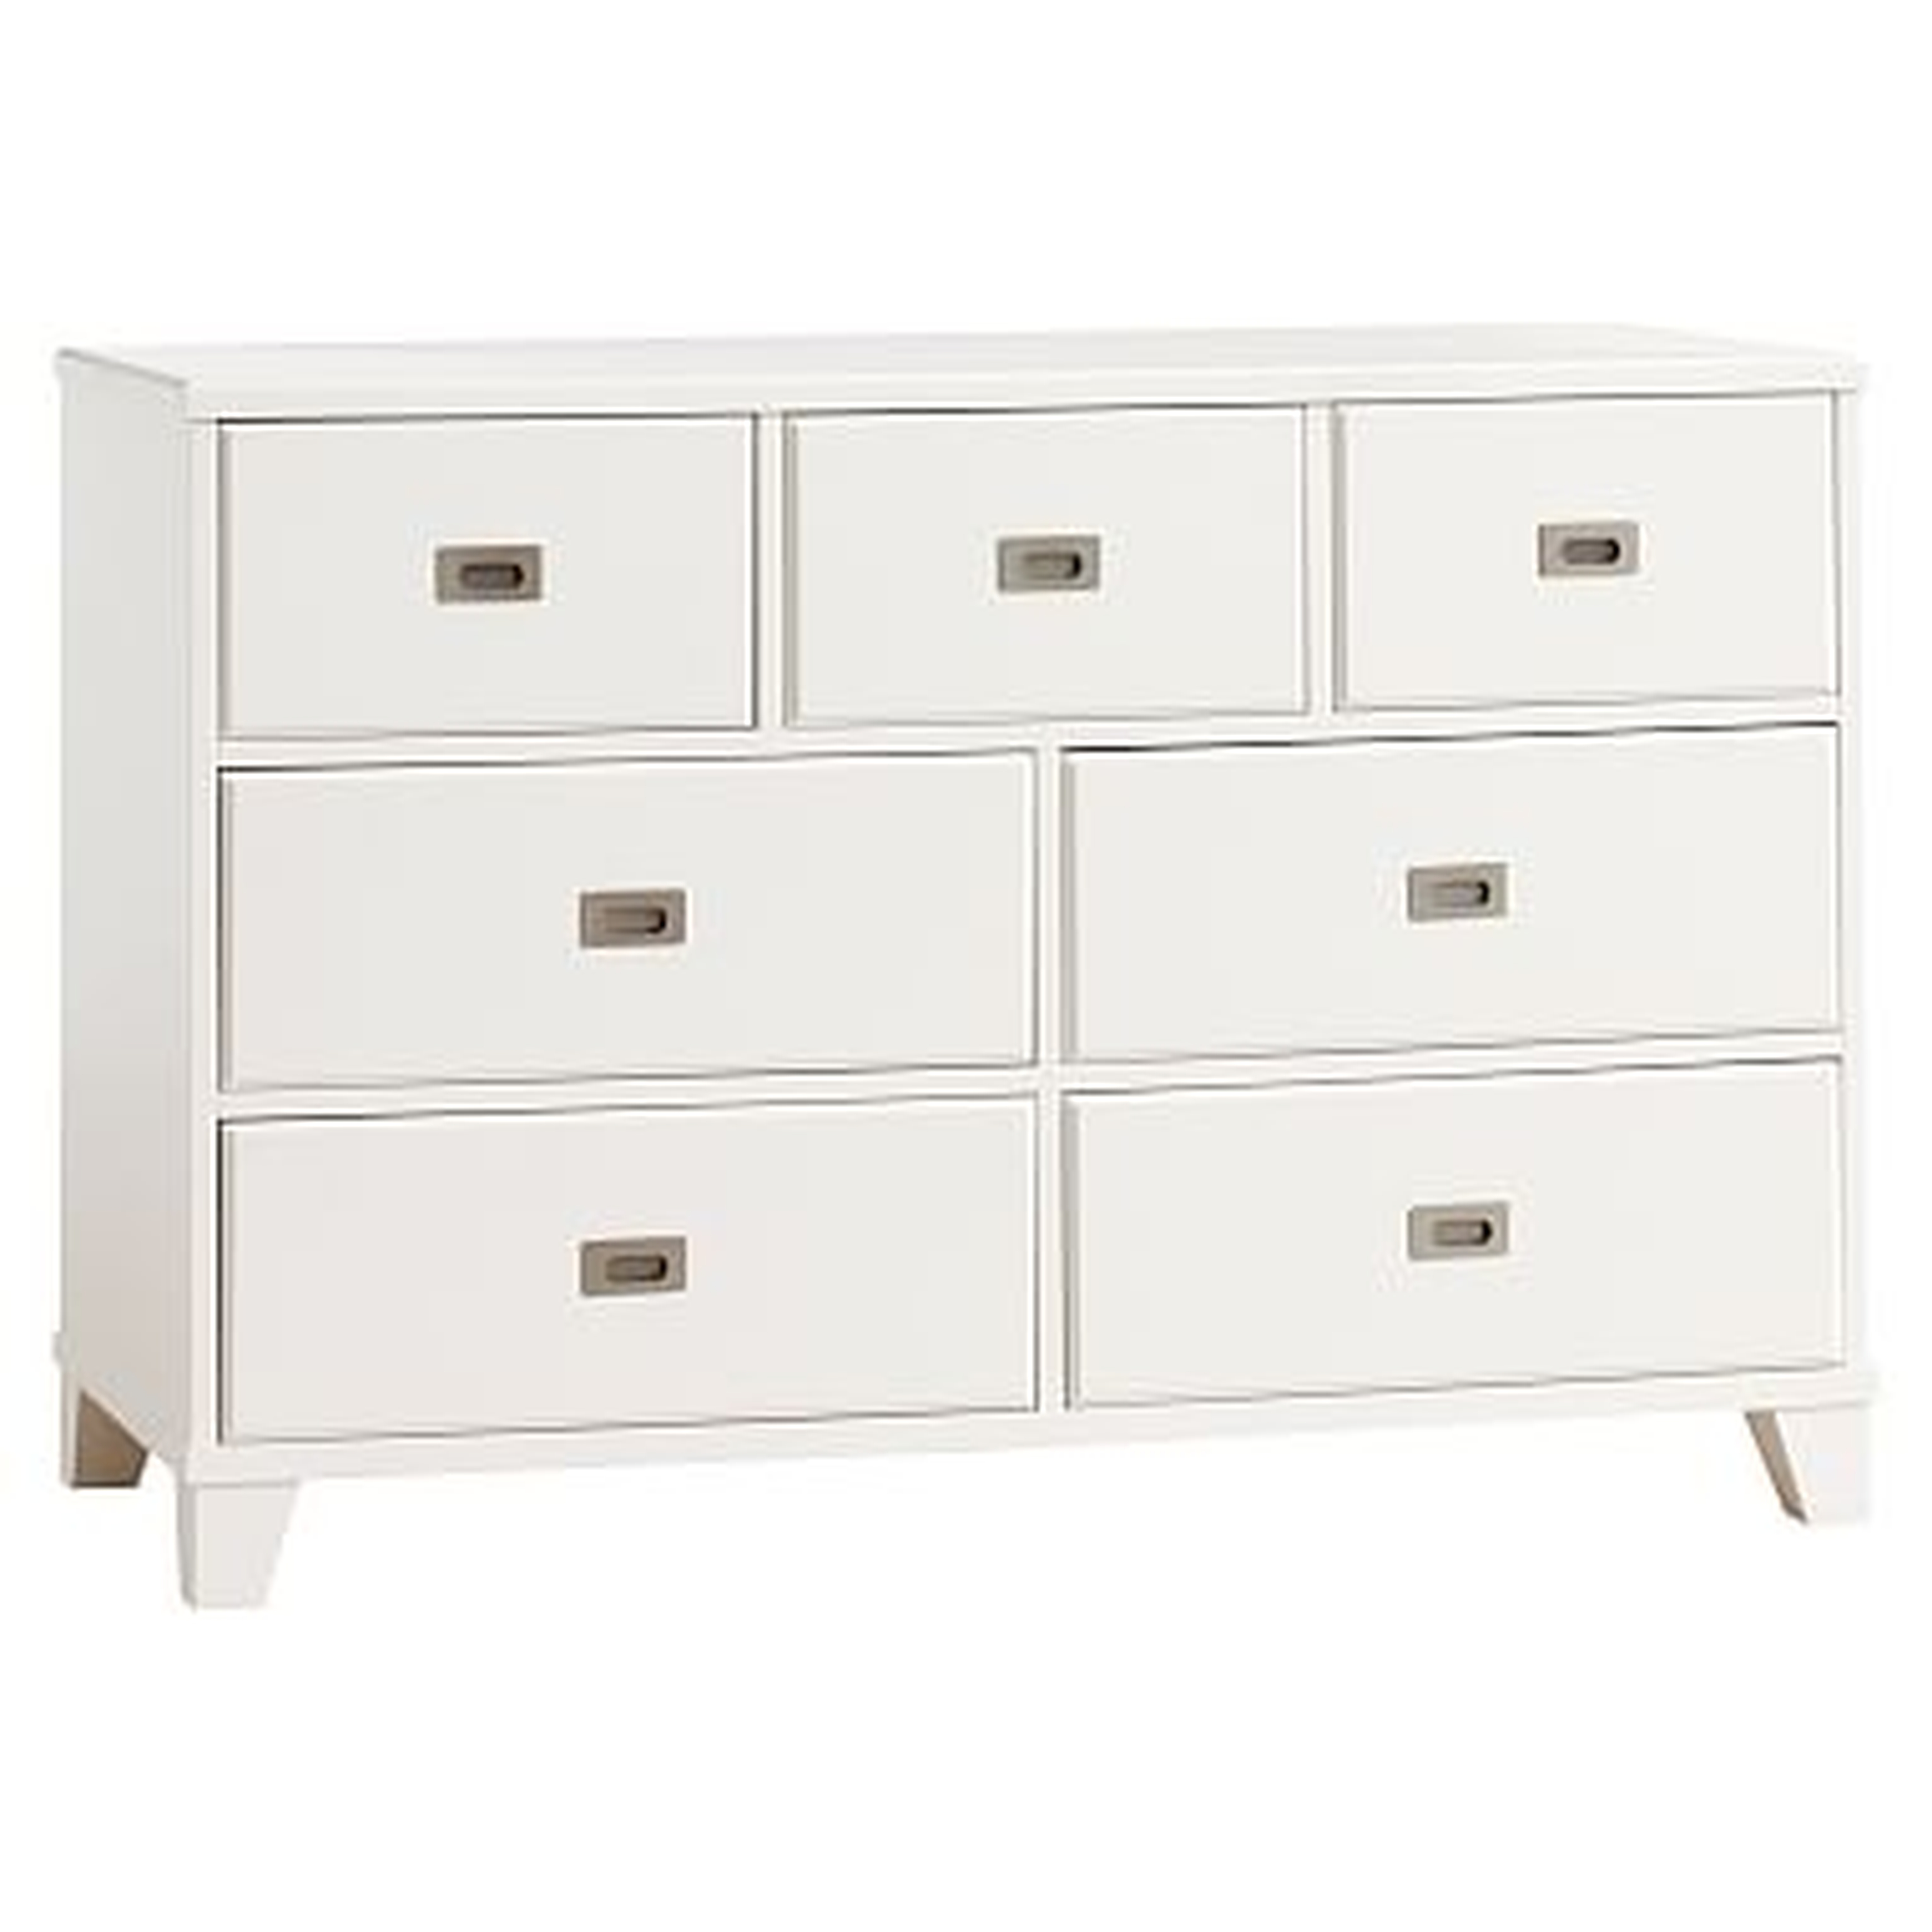 Findley Wide Dresser, Simply White - Pottery Barn Teen